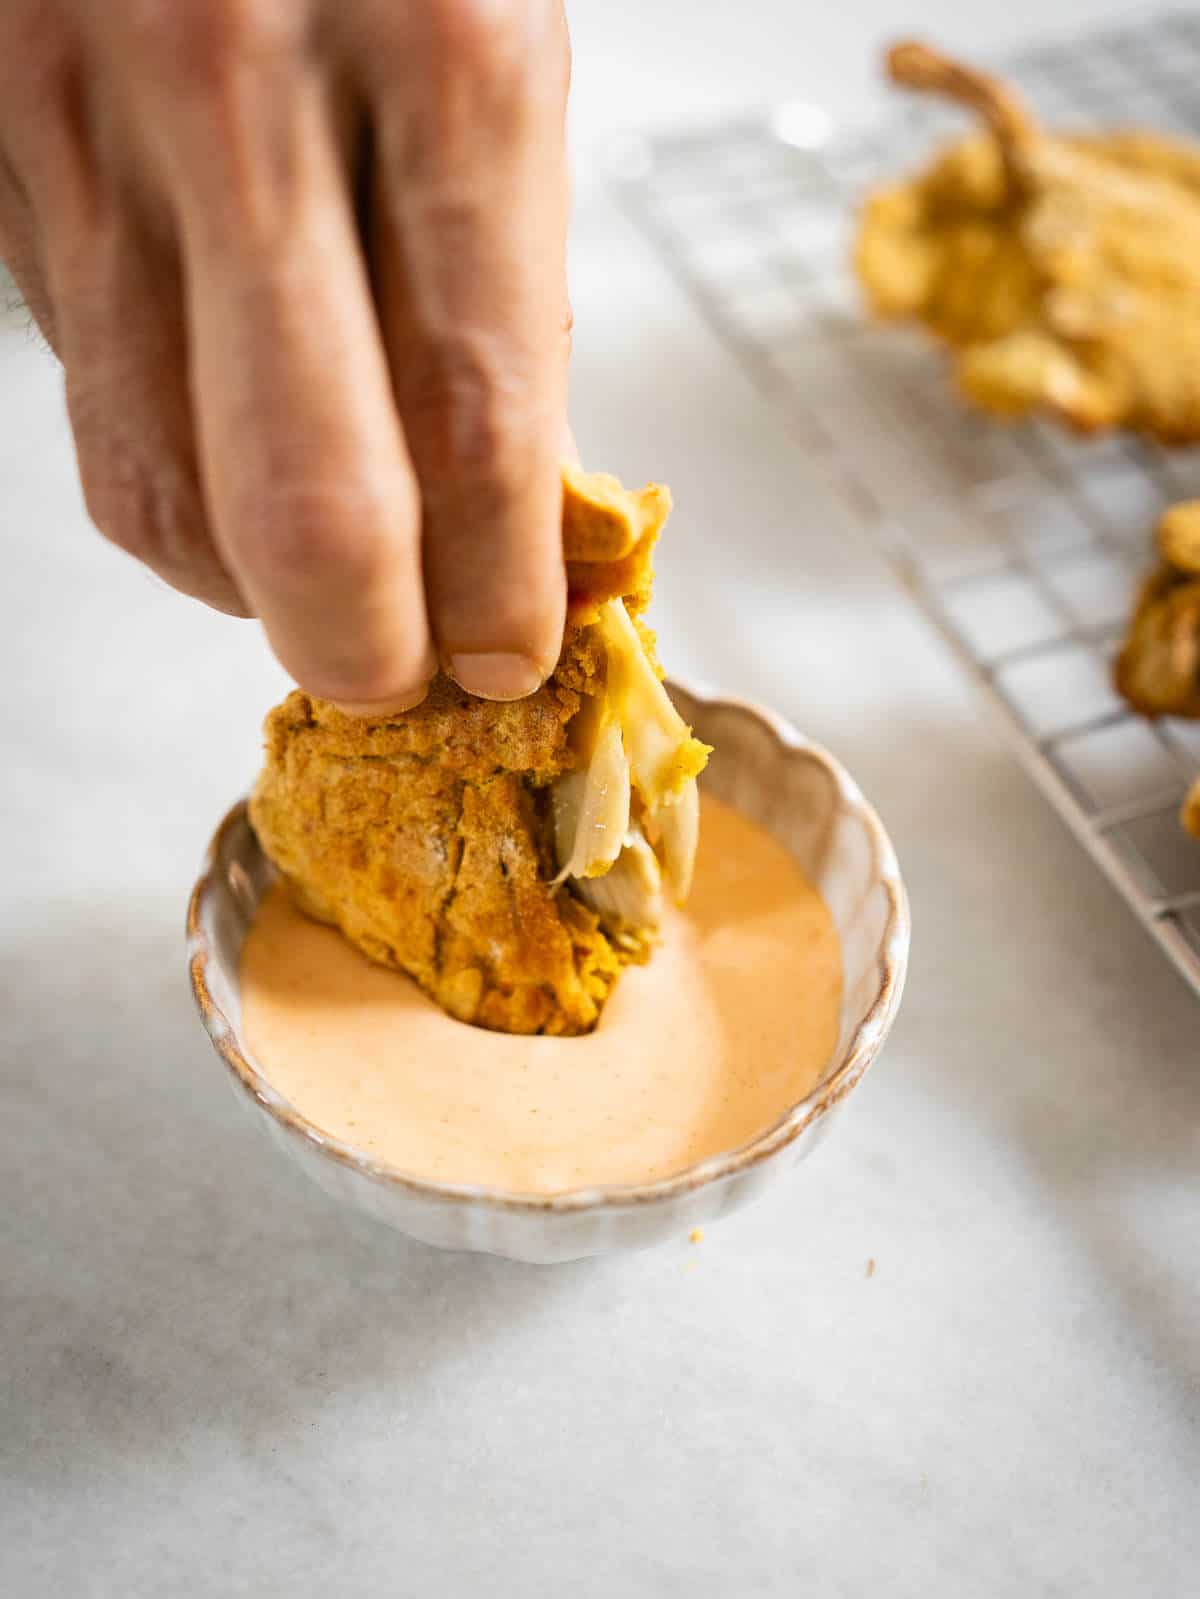 dipping a baked piece of crunchy oyster mushrooms in a mayo-sriracha dipping sauce.